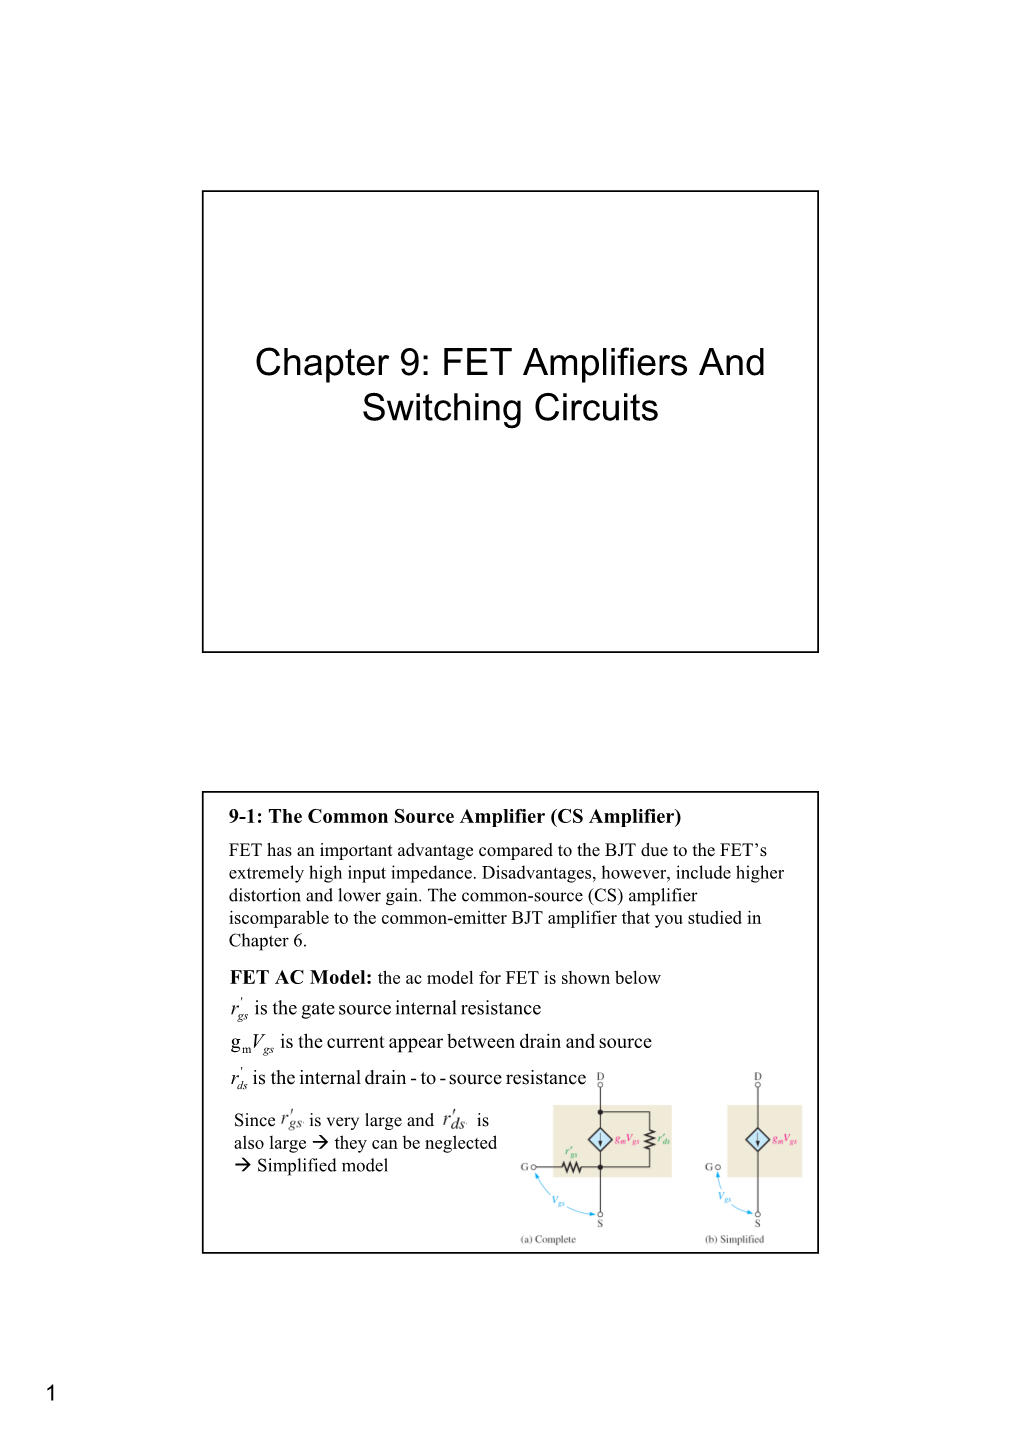 Chapter 9: FET Amplifiers and Switching Circuits